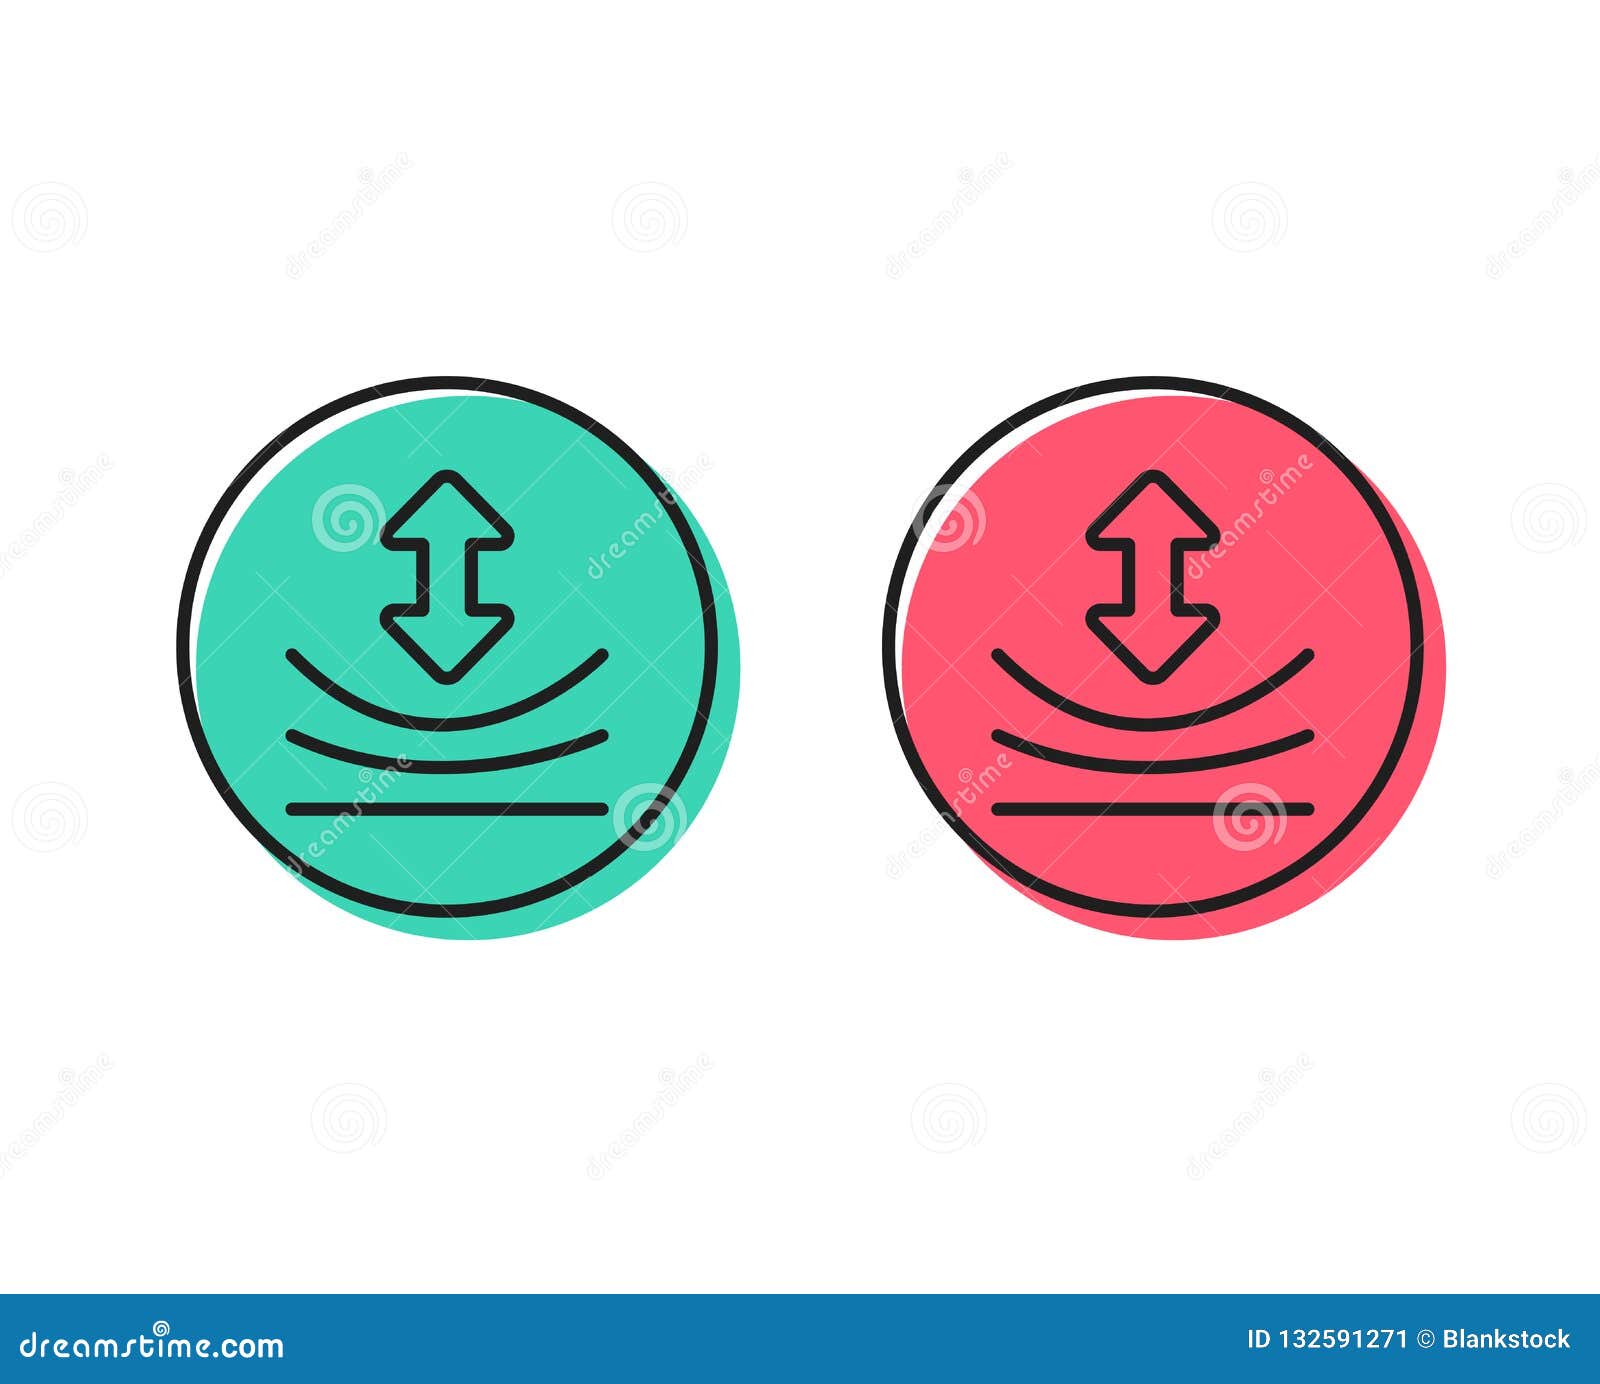 resilience-line-icon-elastic-material-sign-vector-stock-vector